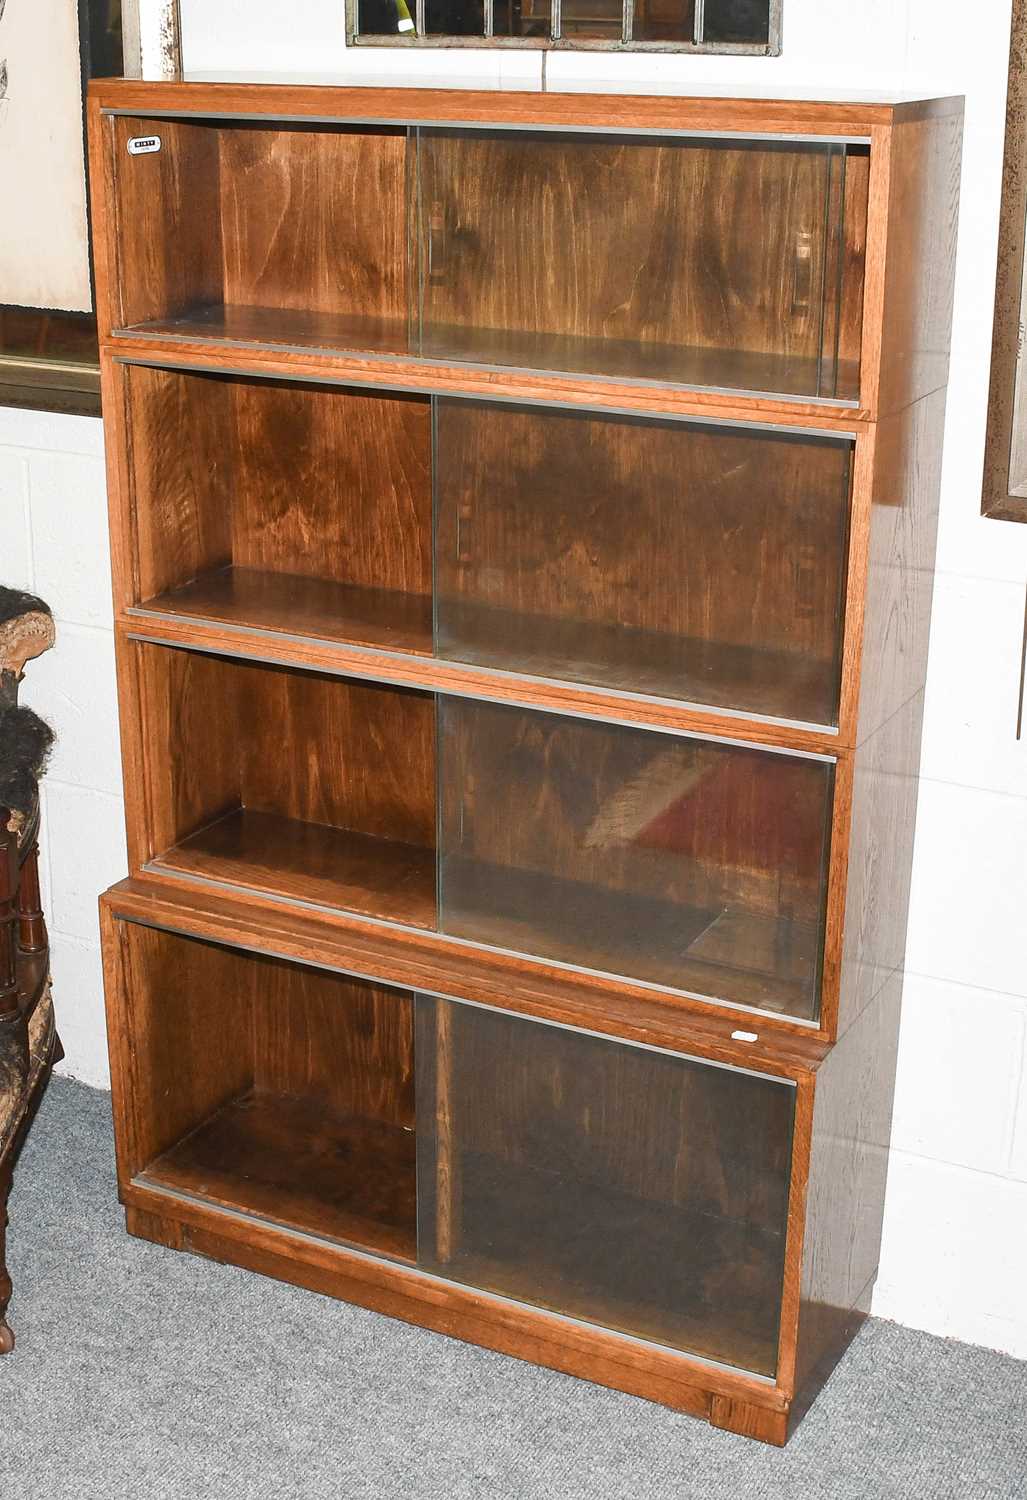 A Near Pair of Oak Four Tier Sectional Bookcases, by Minty, Oxford, 90cm by 40cm by 140cm - Image 2 of 3